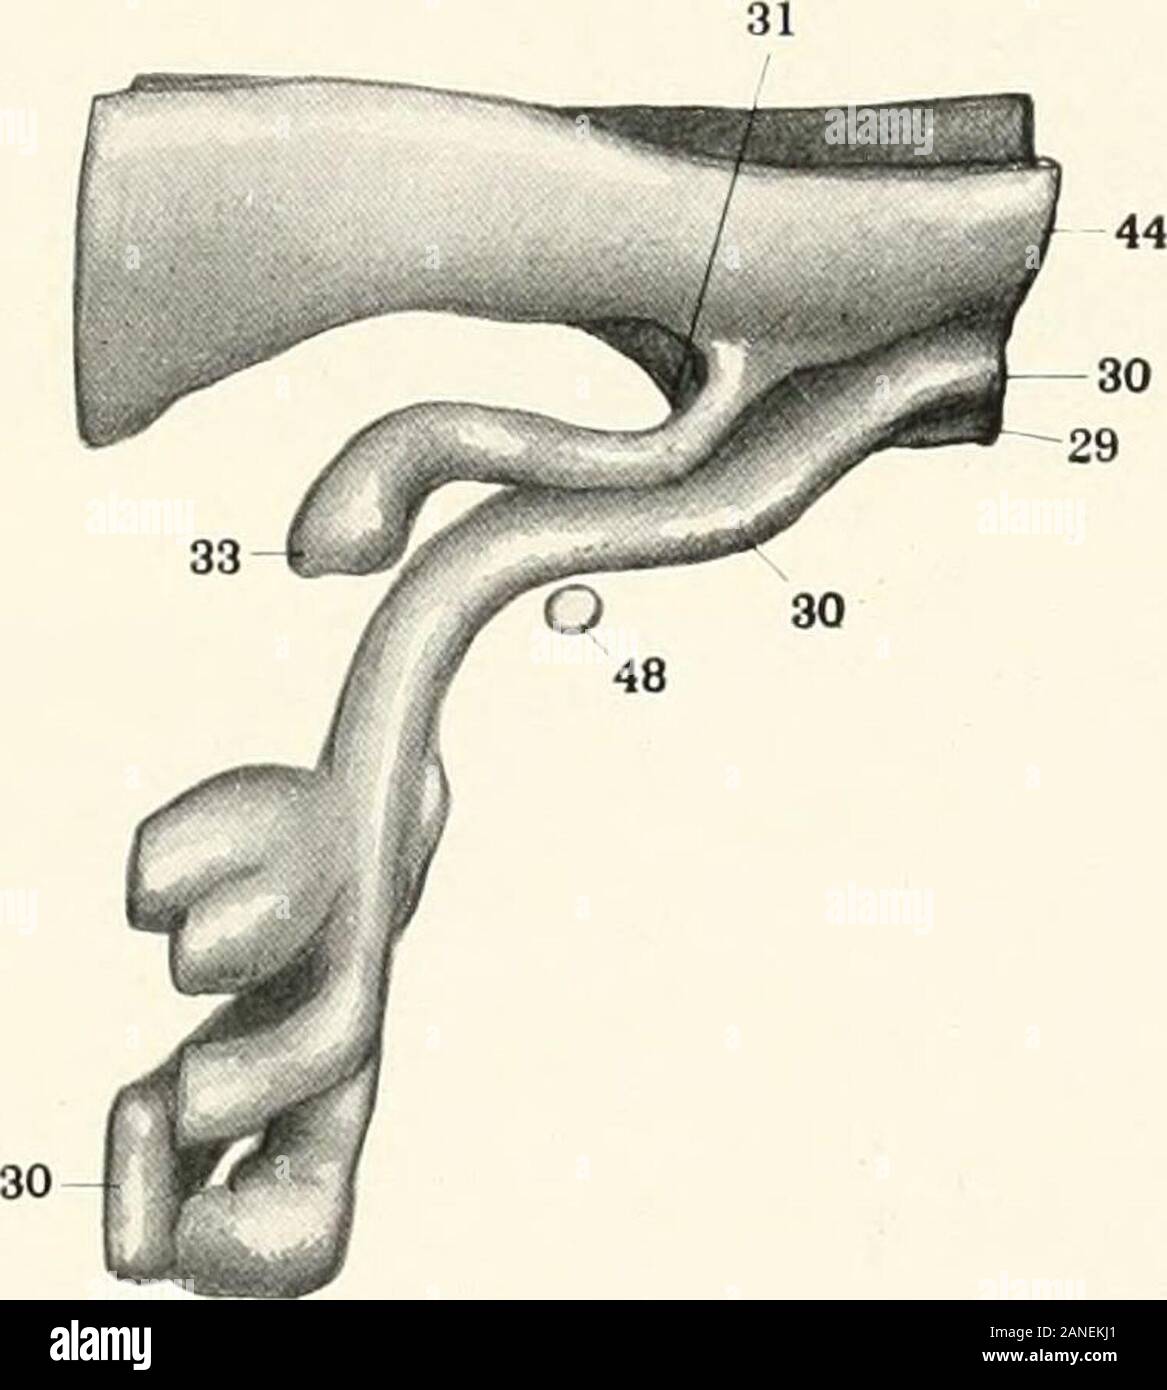 Contributions to the anatomy and development of the salivary glands in the mammalia . 30 Fig. ijg.. Fig. 140. Plate LXXX Fig. 141. The attachment of the submaxillary anlage in a 14 millimeter embryo. Columbia Collection, No. 210, X 115, reduced to 5.Fig. 142. The attachment of the submaxillary anlage in an 18 millimeter embryo. Columbia Collection, No. 27S, X 115, reduced to 5.Fig. 143. The attachment of the submaxillary anlage in a 21 millimeter embro. Columbia Collection, No. 242, X 115, reduced to 5. S. Orbital inclusion, pars cylindrica. 2g. Lingual sulcus. JO. Submaxillary anlage. joa. I Stock Photo